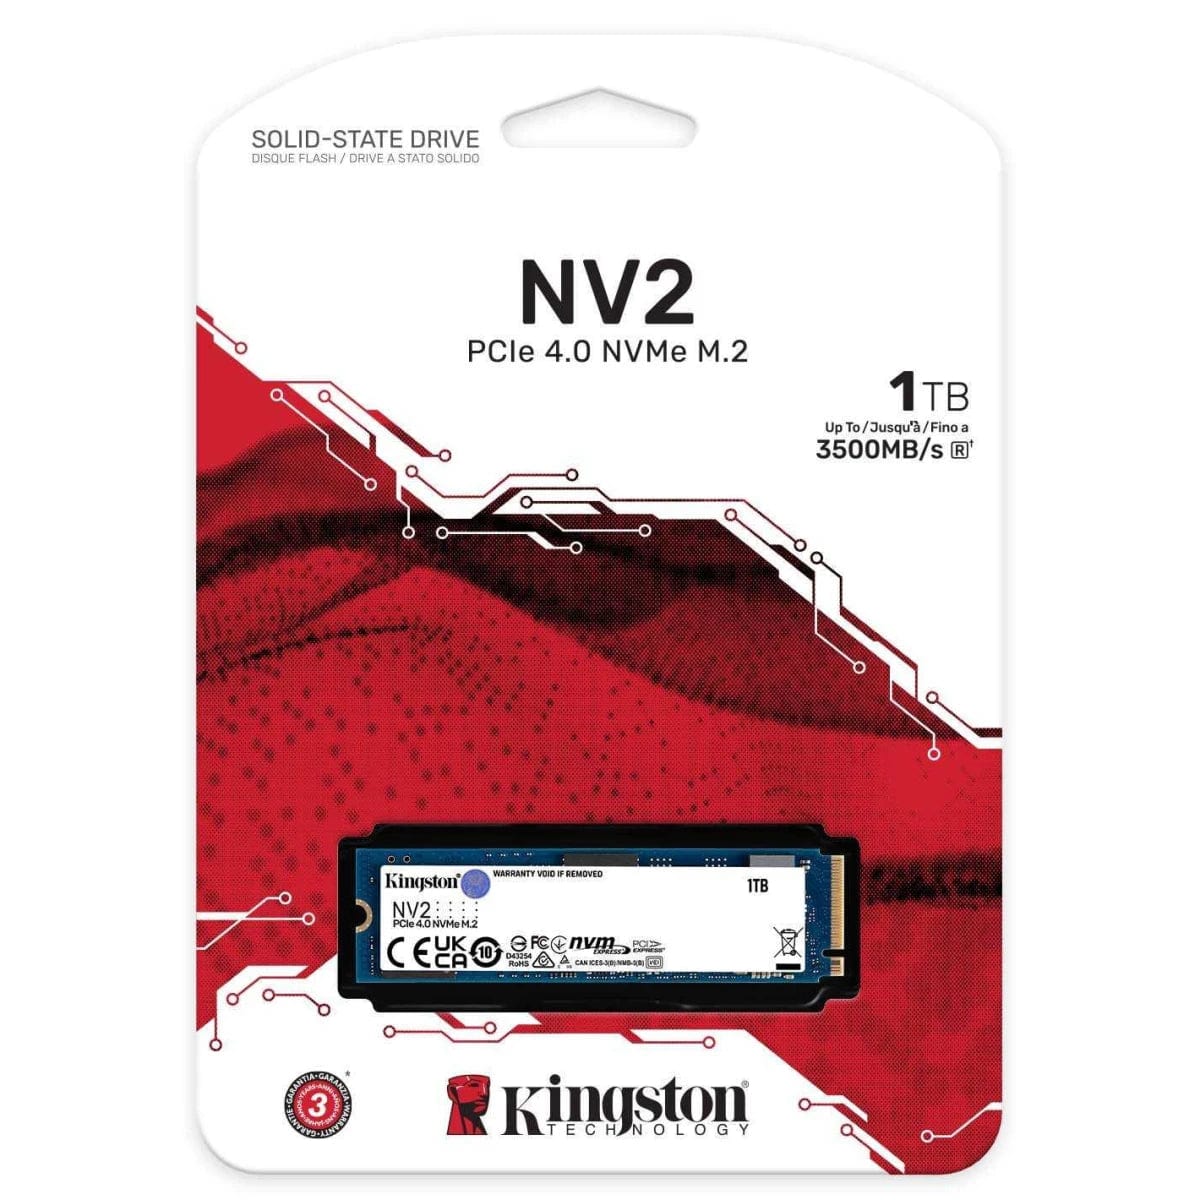 KINGSTON Solid State Drive Kingston NV2 1TB M.2 2280 NVMe PCIe 4.0 Internal SSD Up to 3500 MB/s